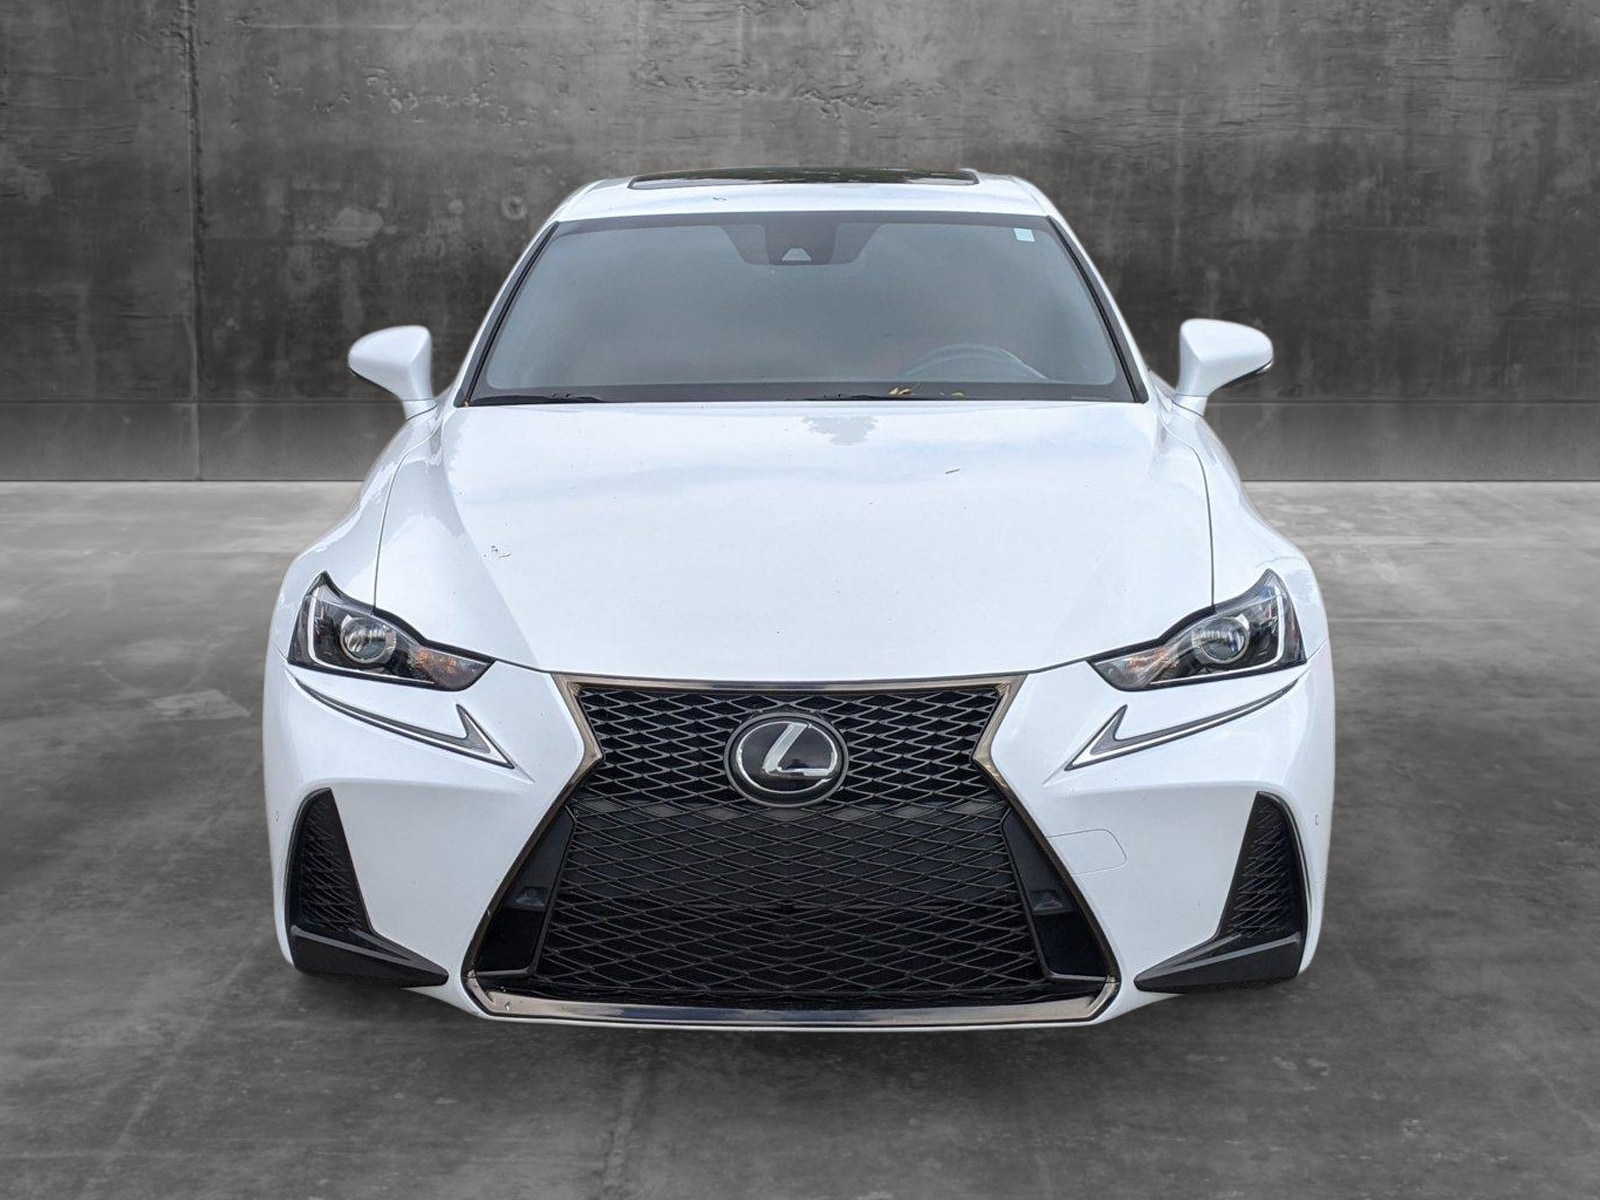 Used 2019 Lexus IS 300 F SPORT with VIN JTHBA1D21K5097270 for sale in Hayward, CA